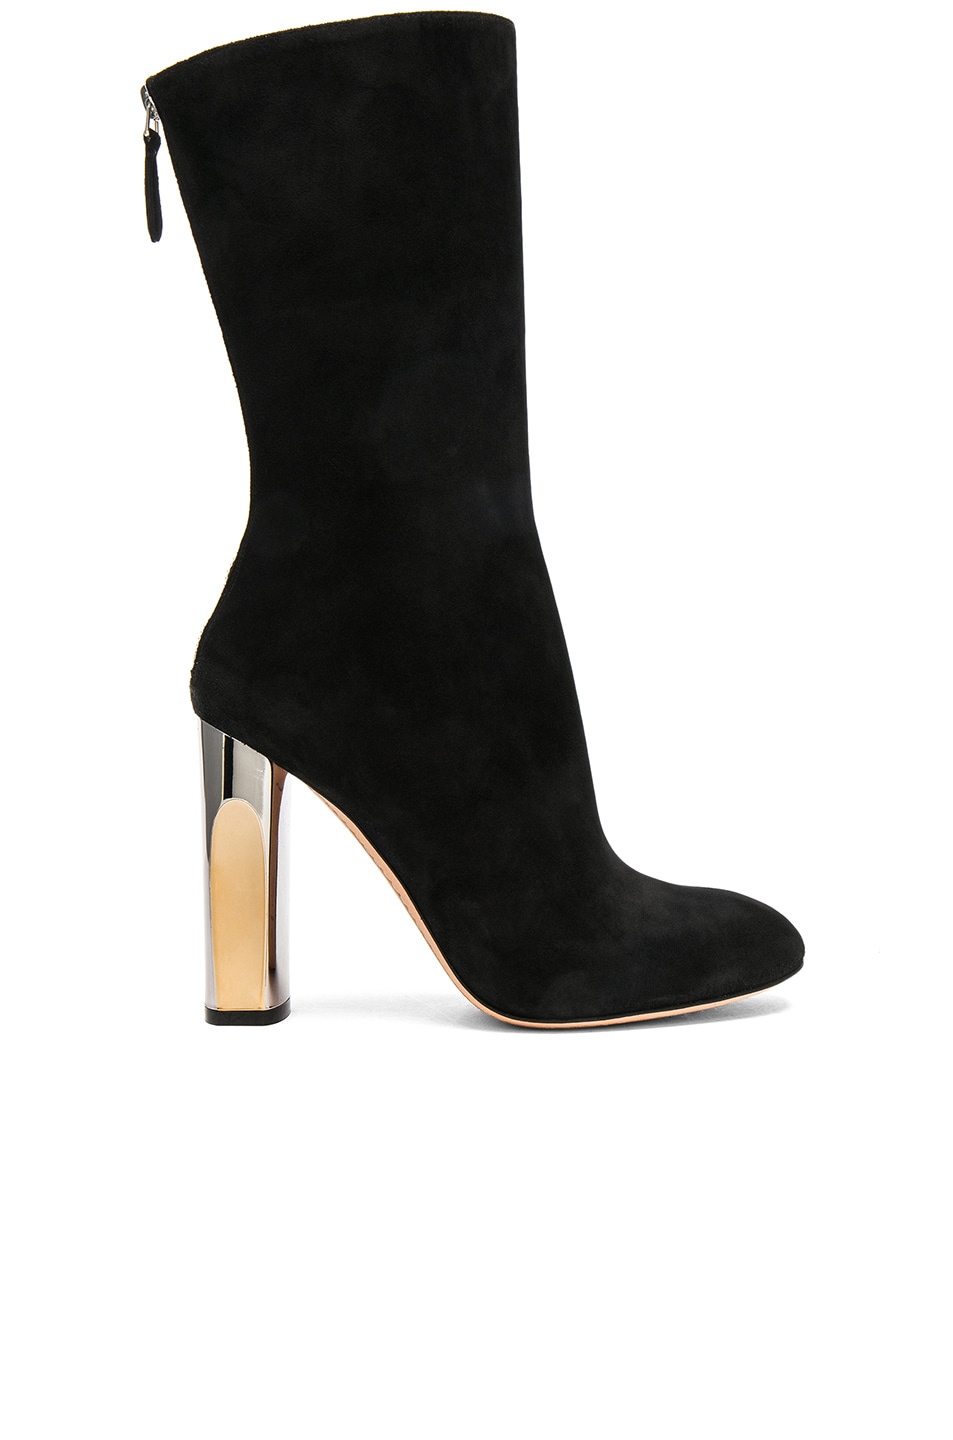 Image 1 of Alexander McQueen Cashmere Suede Tall Heeled Boots in Black